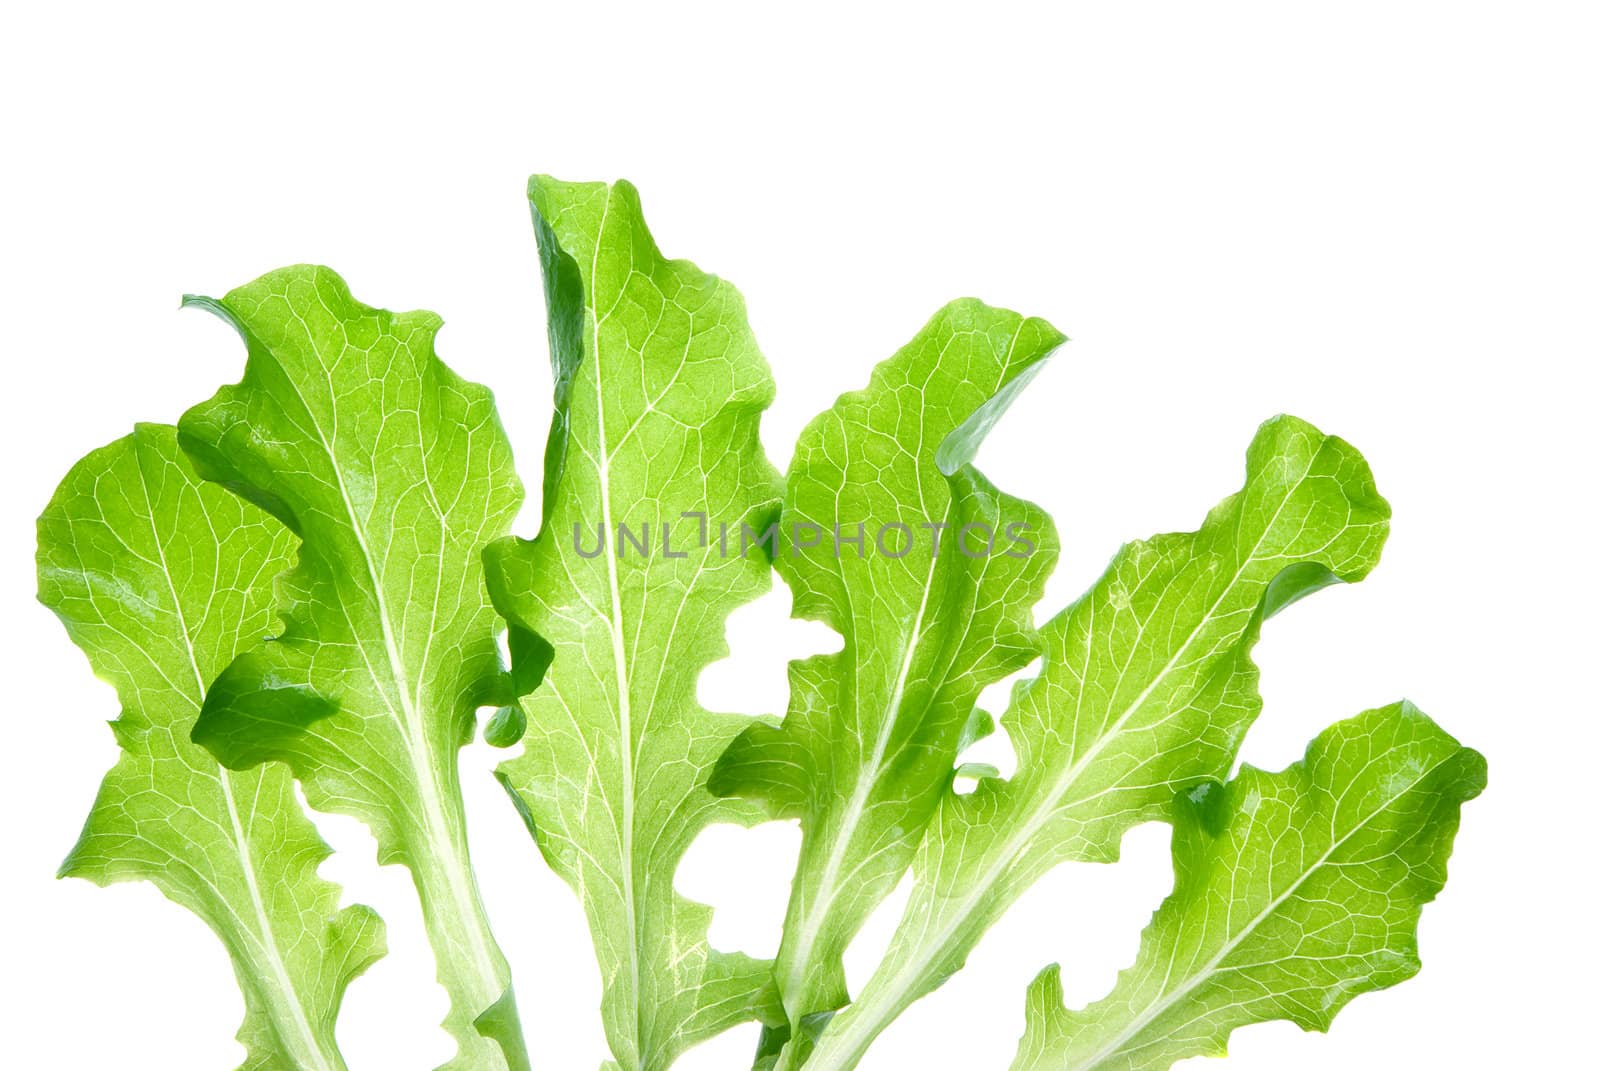 Green salads leaves on a white background.